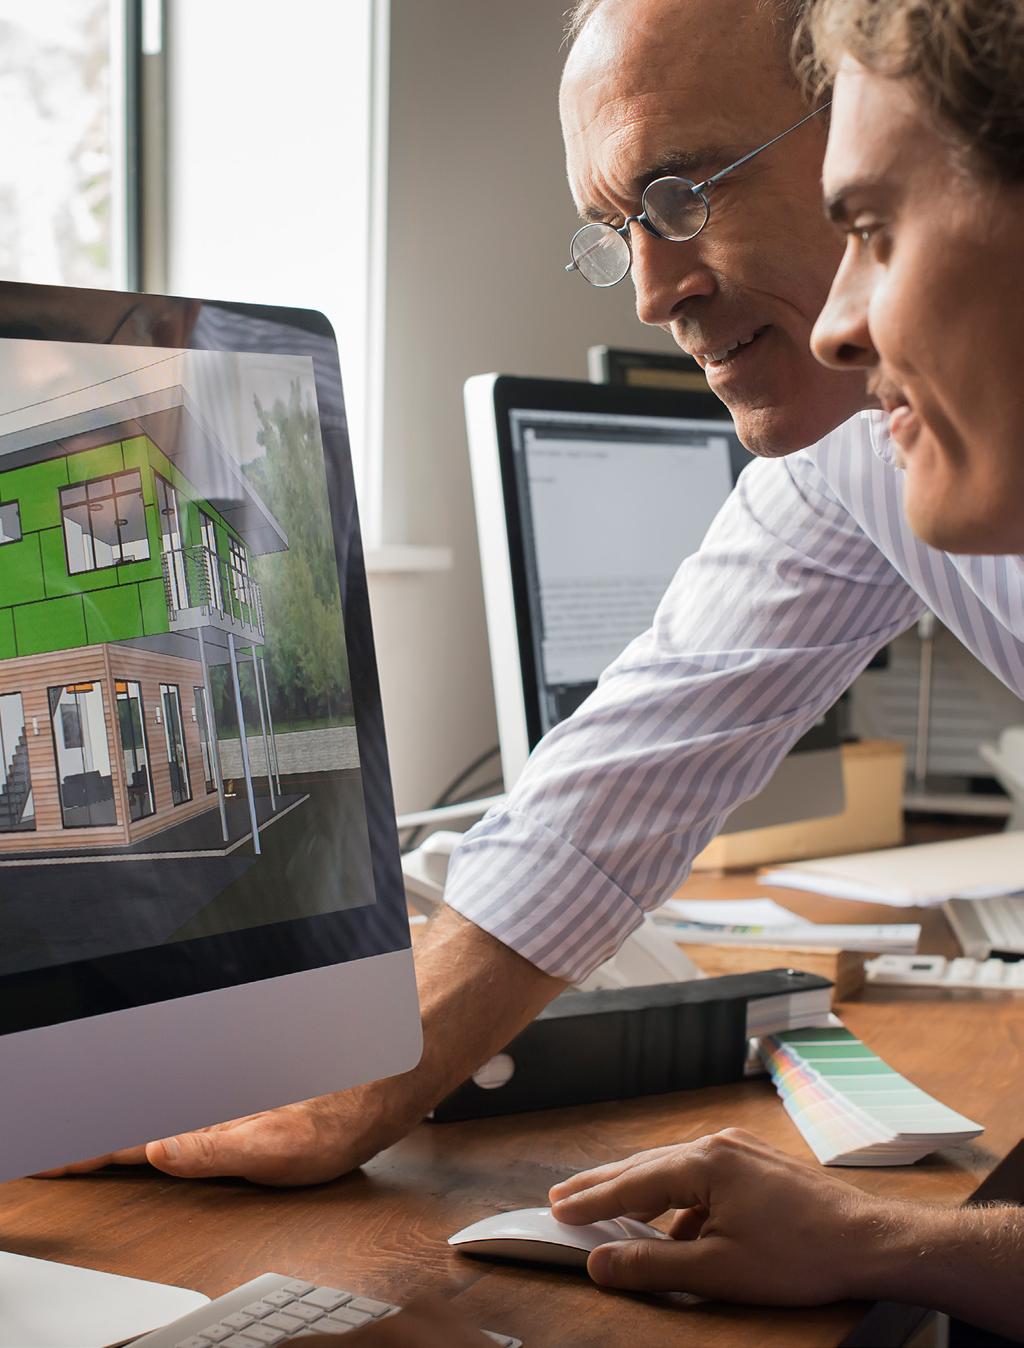 GET STARTED If a live project is an option, it would be ideal to select a client who embraces new technology and has an understanding of what BIM will do for them.